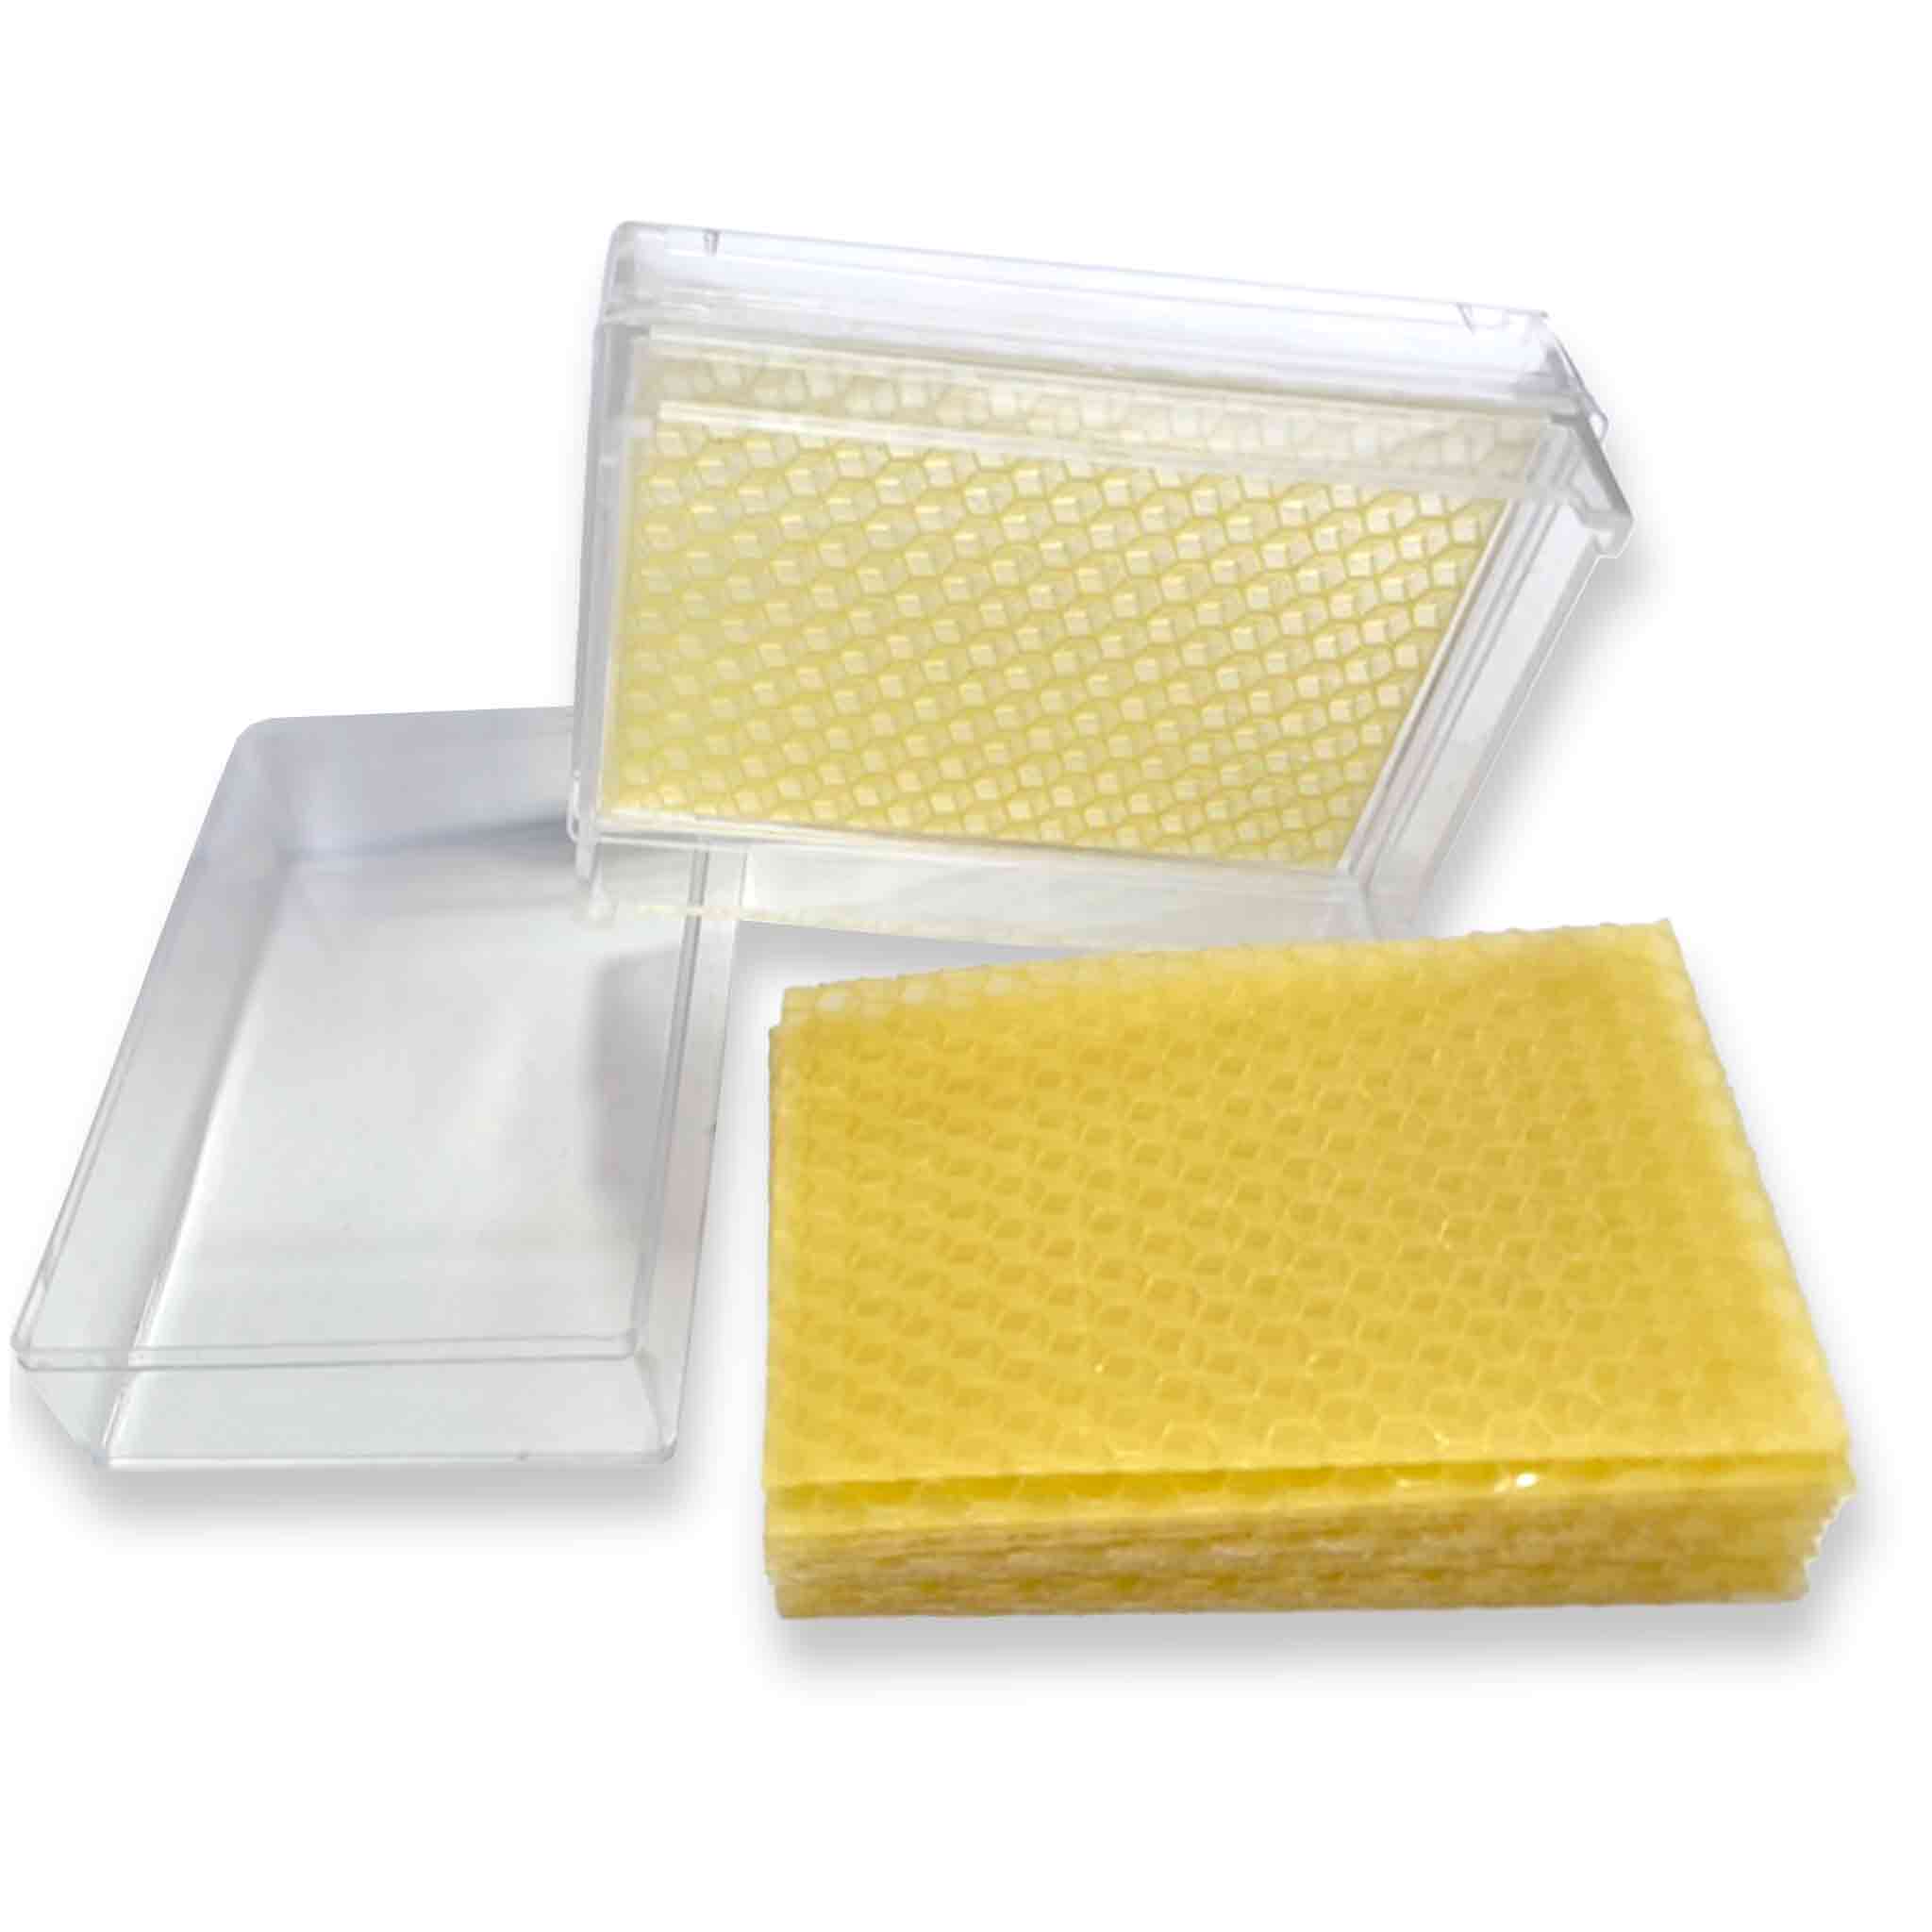 Containers Cassettes Frame Holder for Honey Comb - Processing collection by Buzzbee Beekeeping Supplies